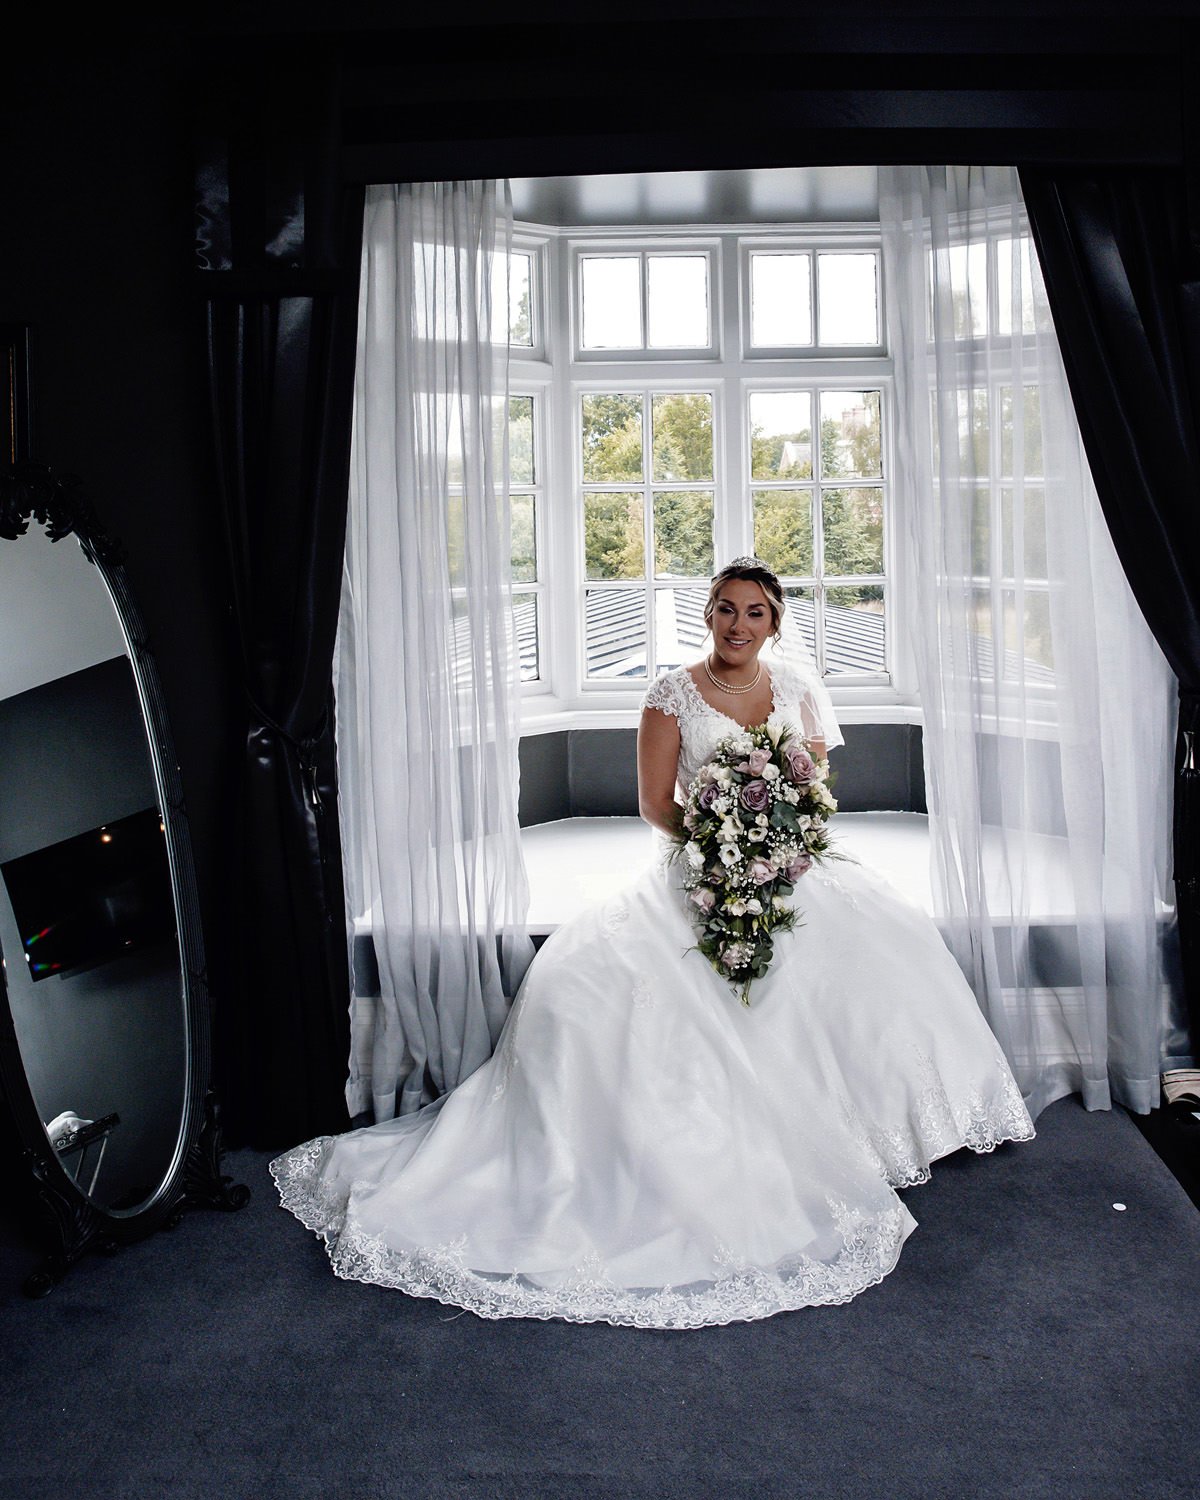 Swynford Manor's bridal suite is perfect for wedding photos